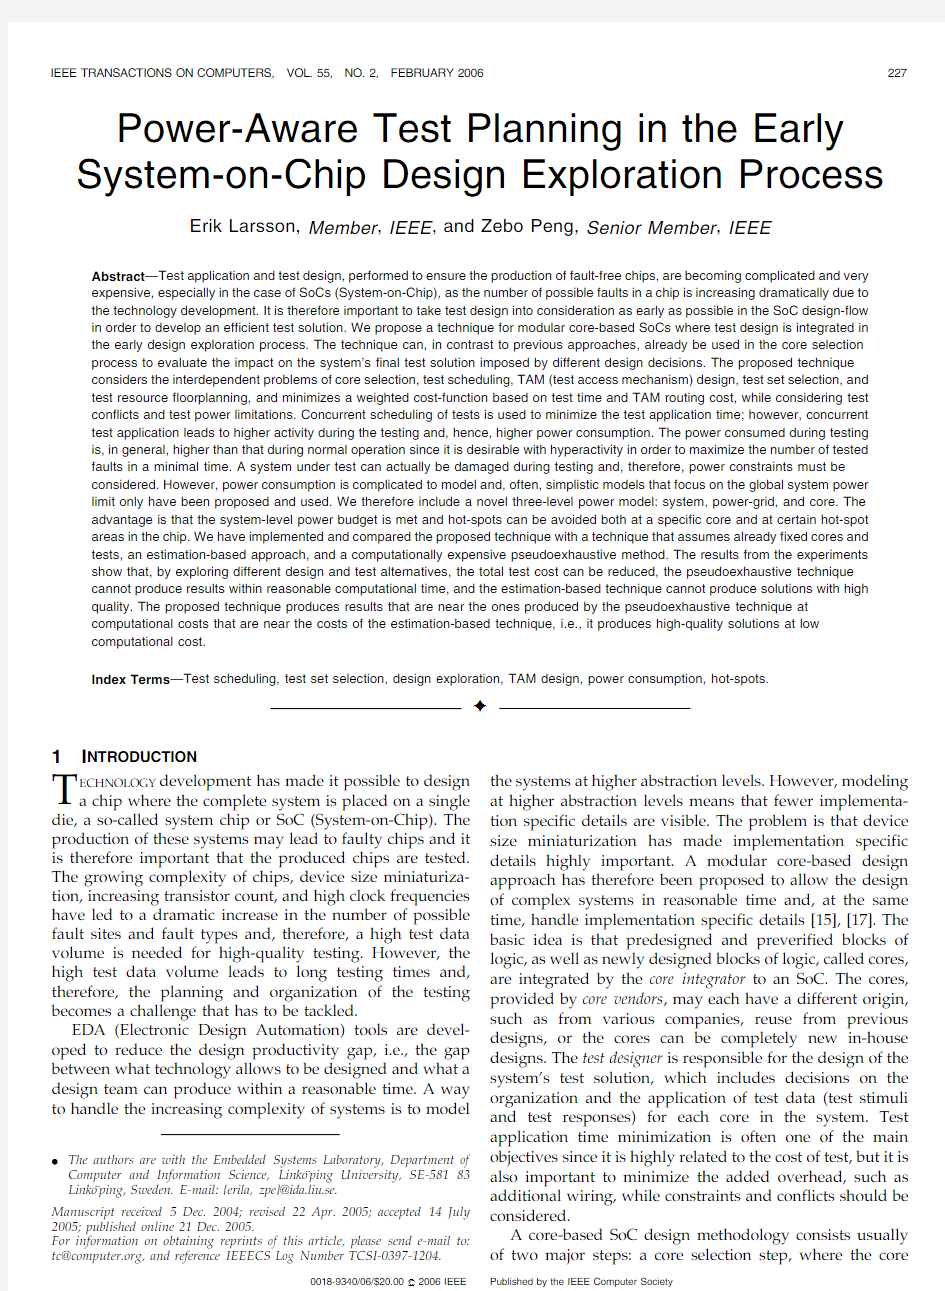 Power-Aware Test Planning in the Early System-on-Chip Design Exploration Process